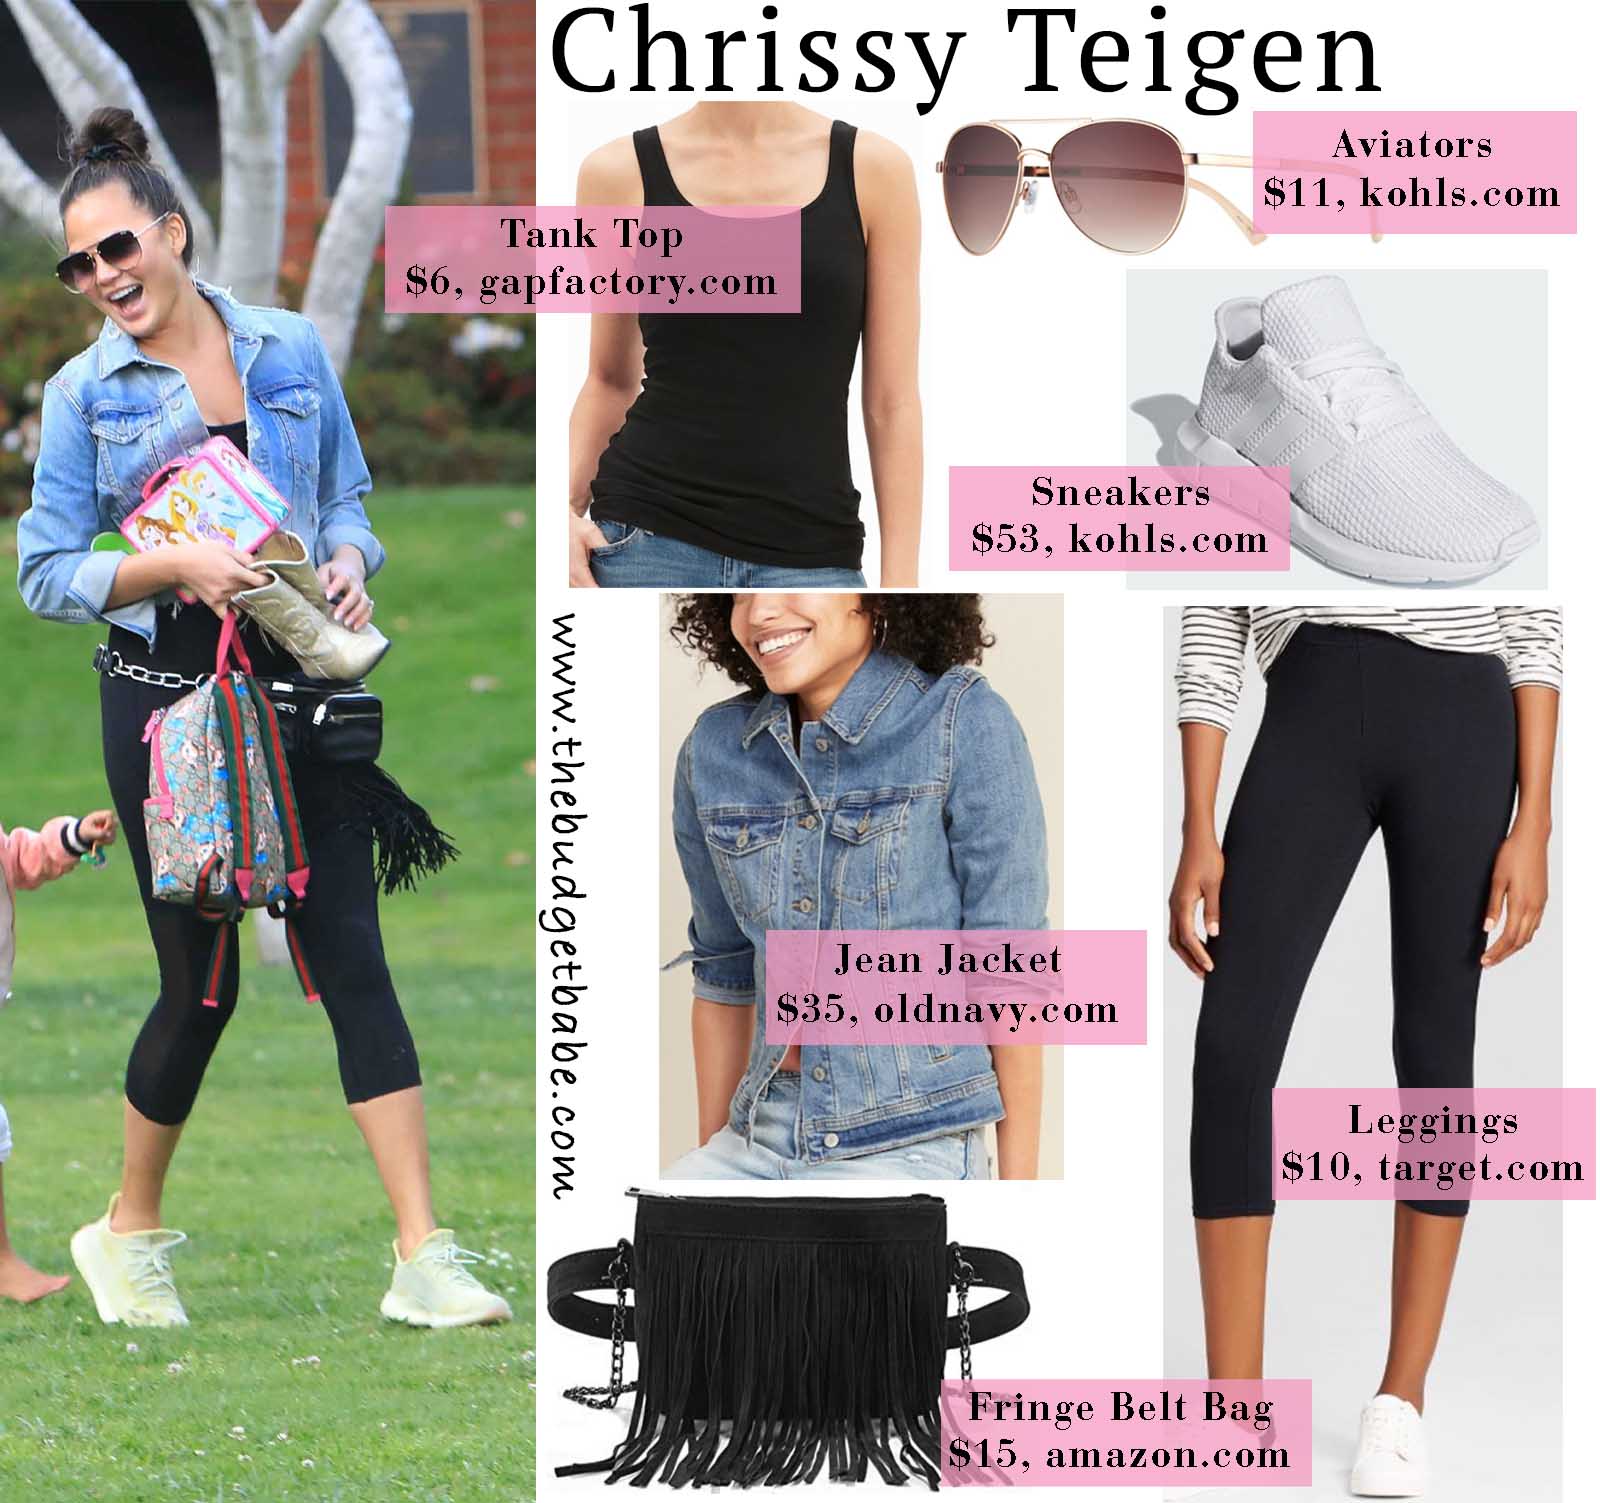 Chrissy Teigen is casual chic in this fun outfit!